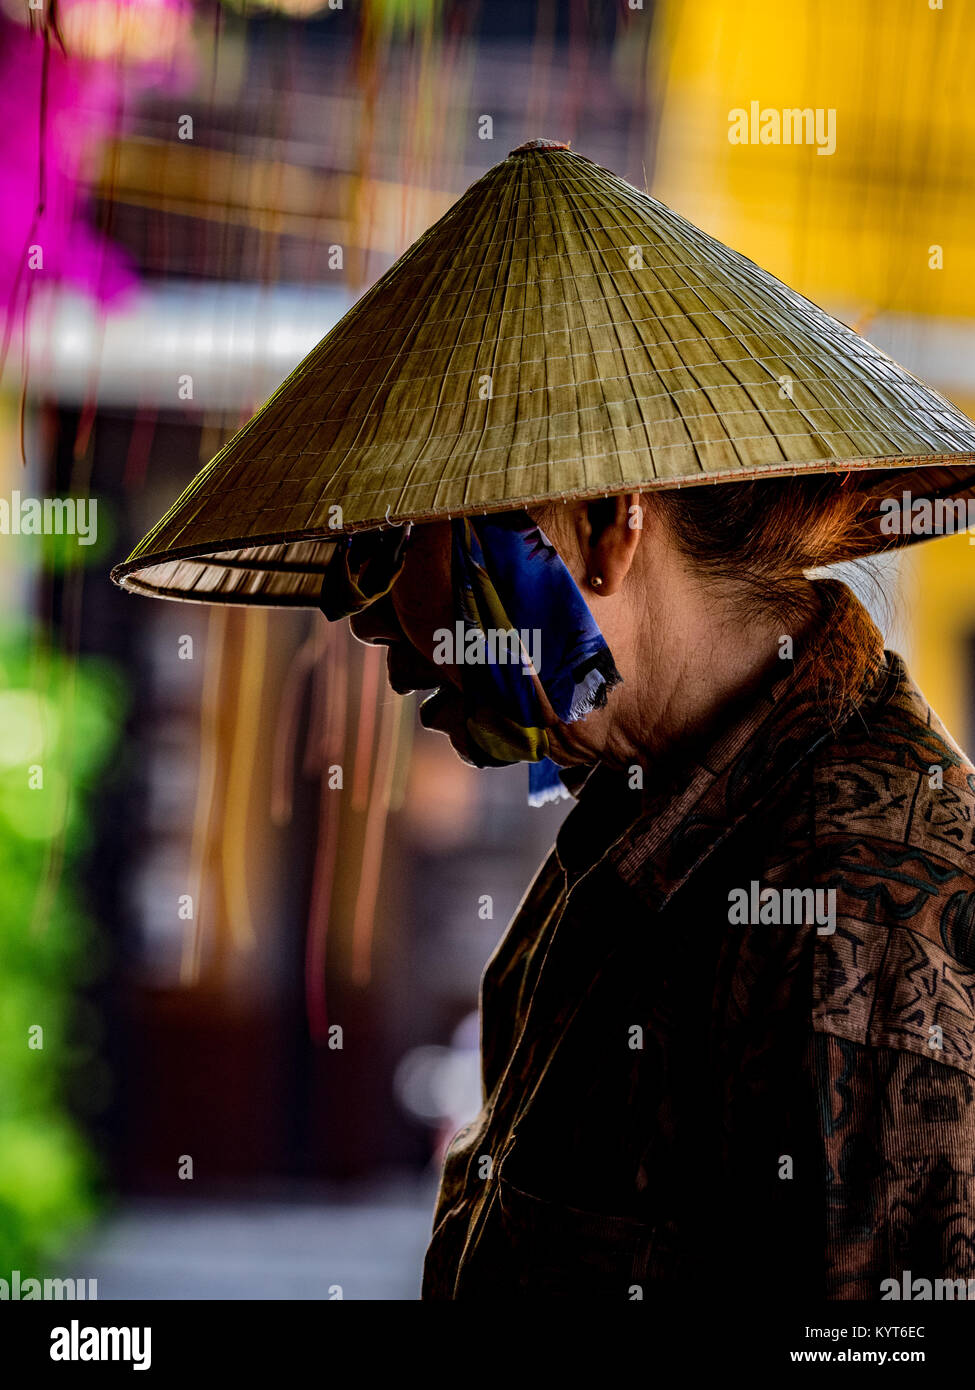 Old lady at Hoi An market. Vietnam Stock Photo